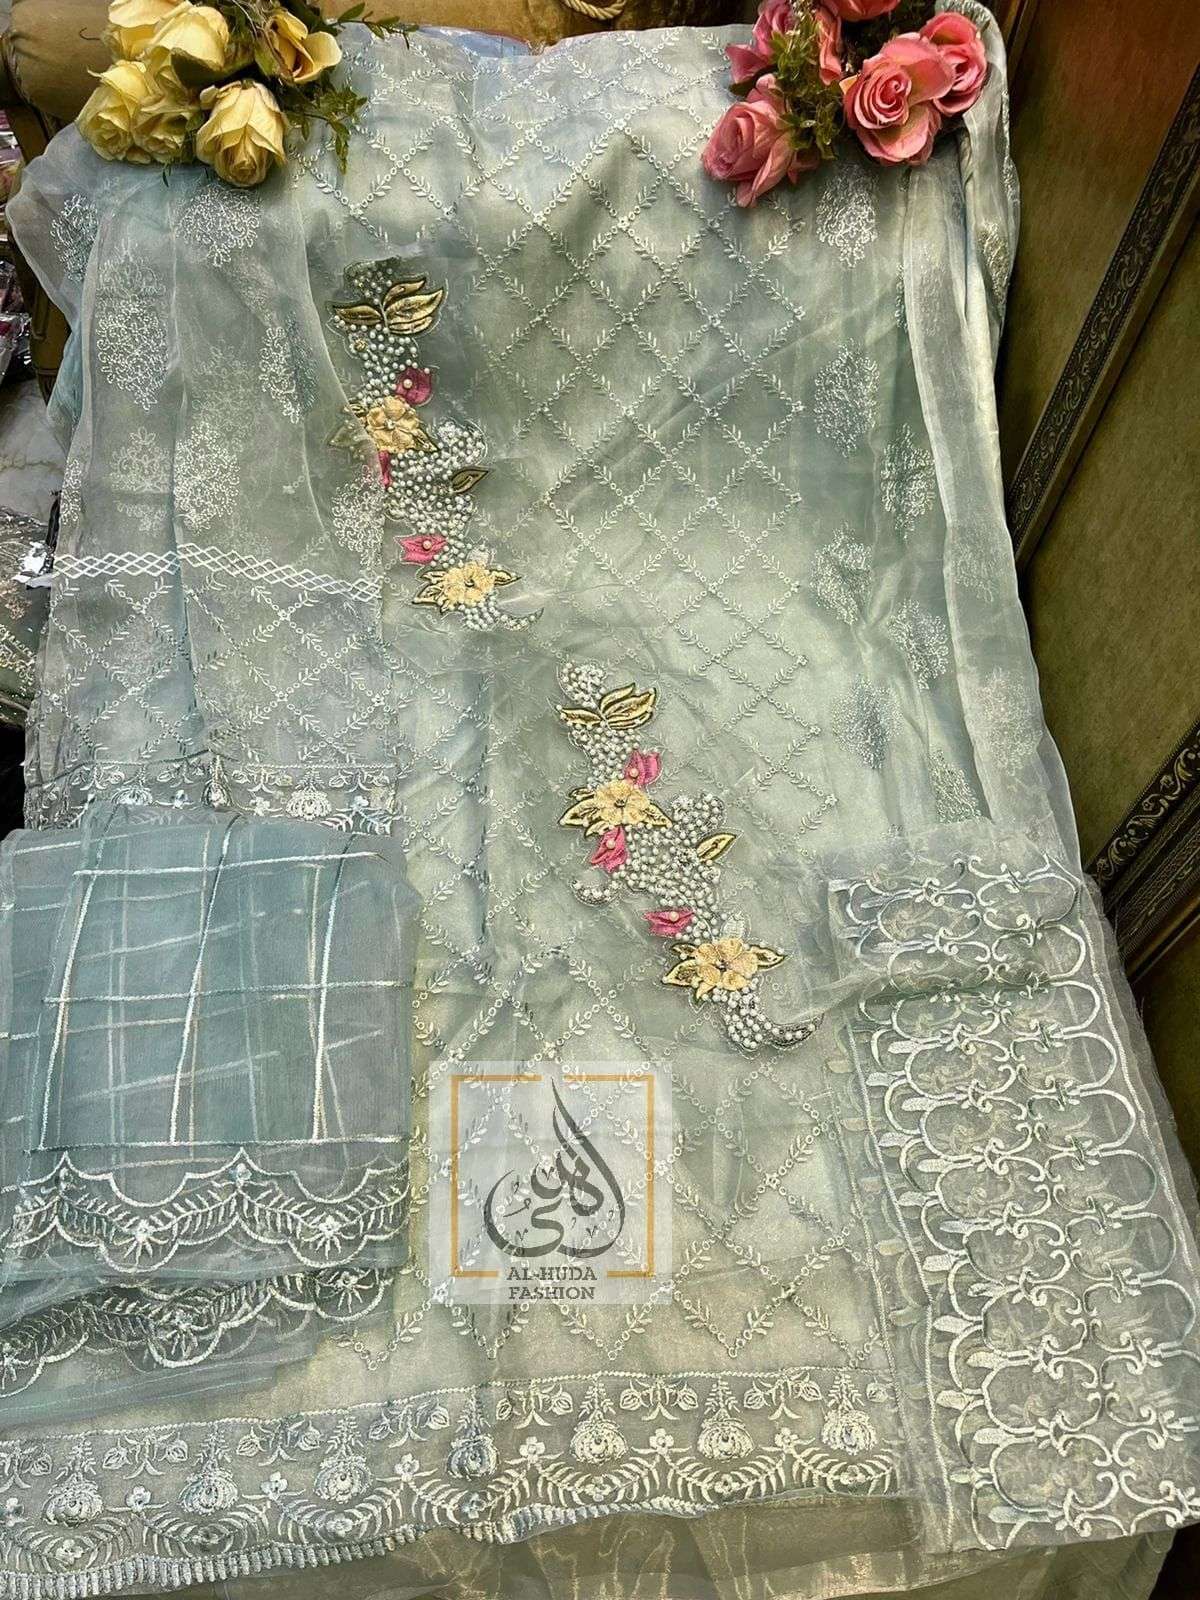 AL-HUDA HITS BY AL-HUDA FASHION 01 TO 02 SERIES BEAUTIFUL PAKISTANI SUITS COLORFUL STYLISH FANCY CASUAL WEAR & ETHNIC WEAR ORGANZA EMBROIDERED DRESSES AT WHOLESALE PRICE